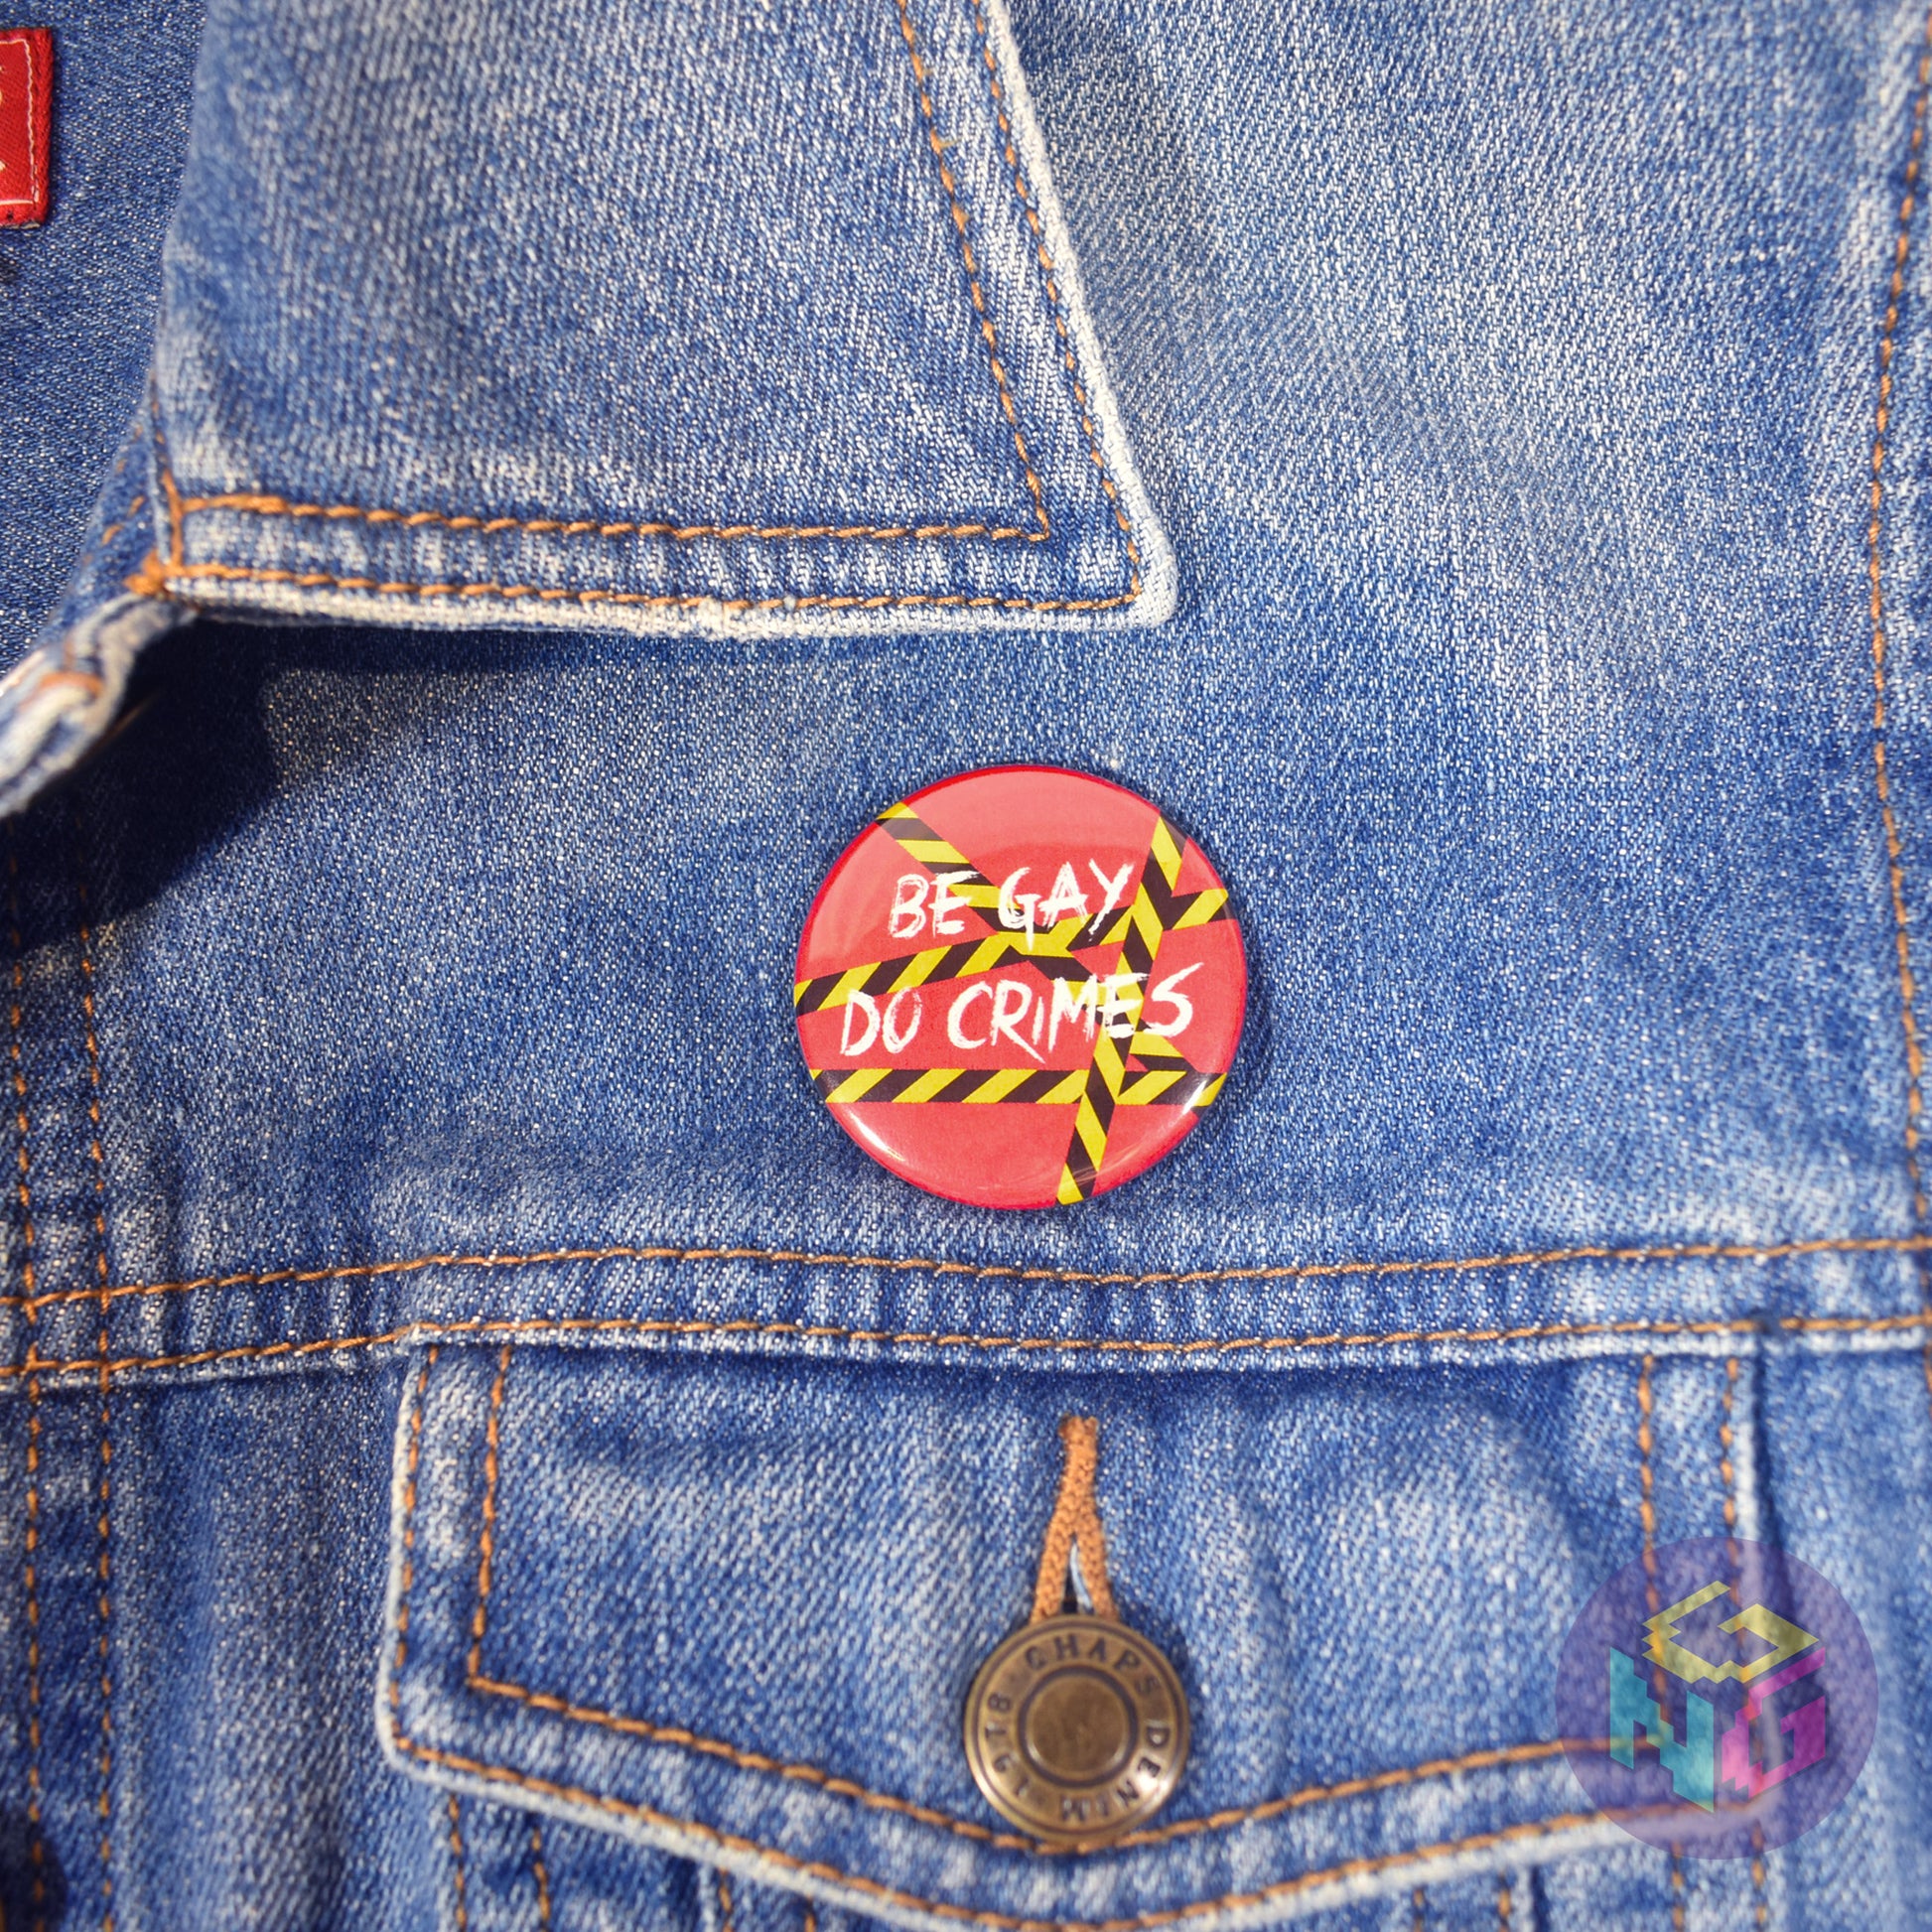 be gay do crimes pin resting on the chest of a denim jacket